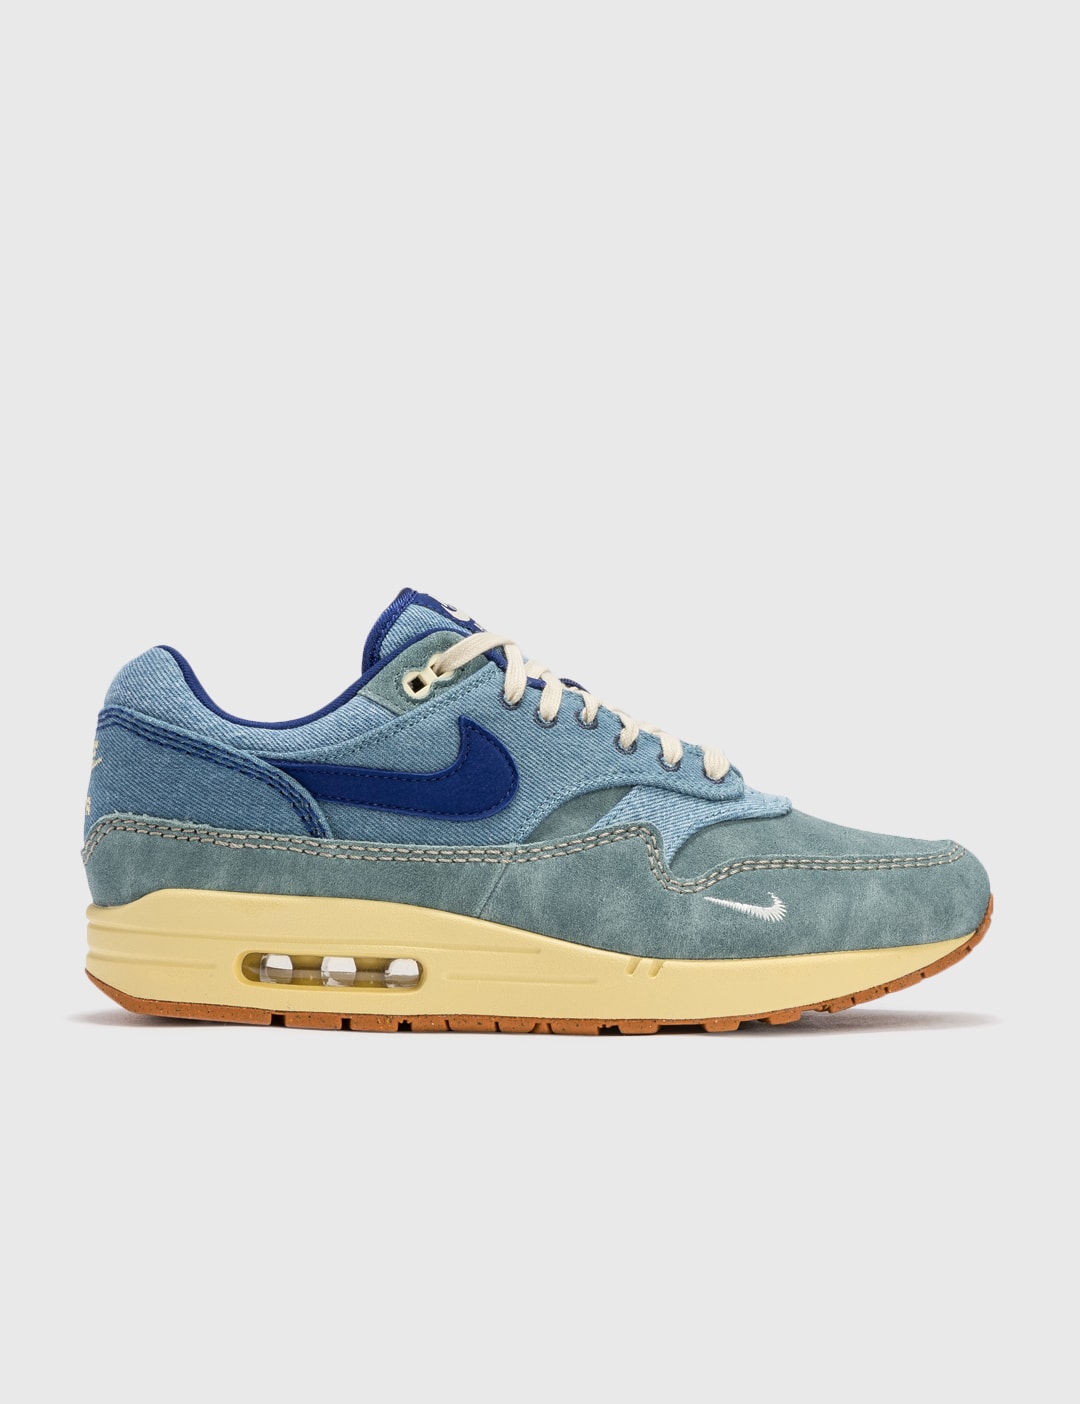 Nike - Air Max 1 "Dirty | - Curated Fashion and Lifestyle by Hypebeast